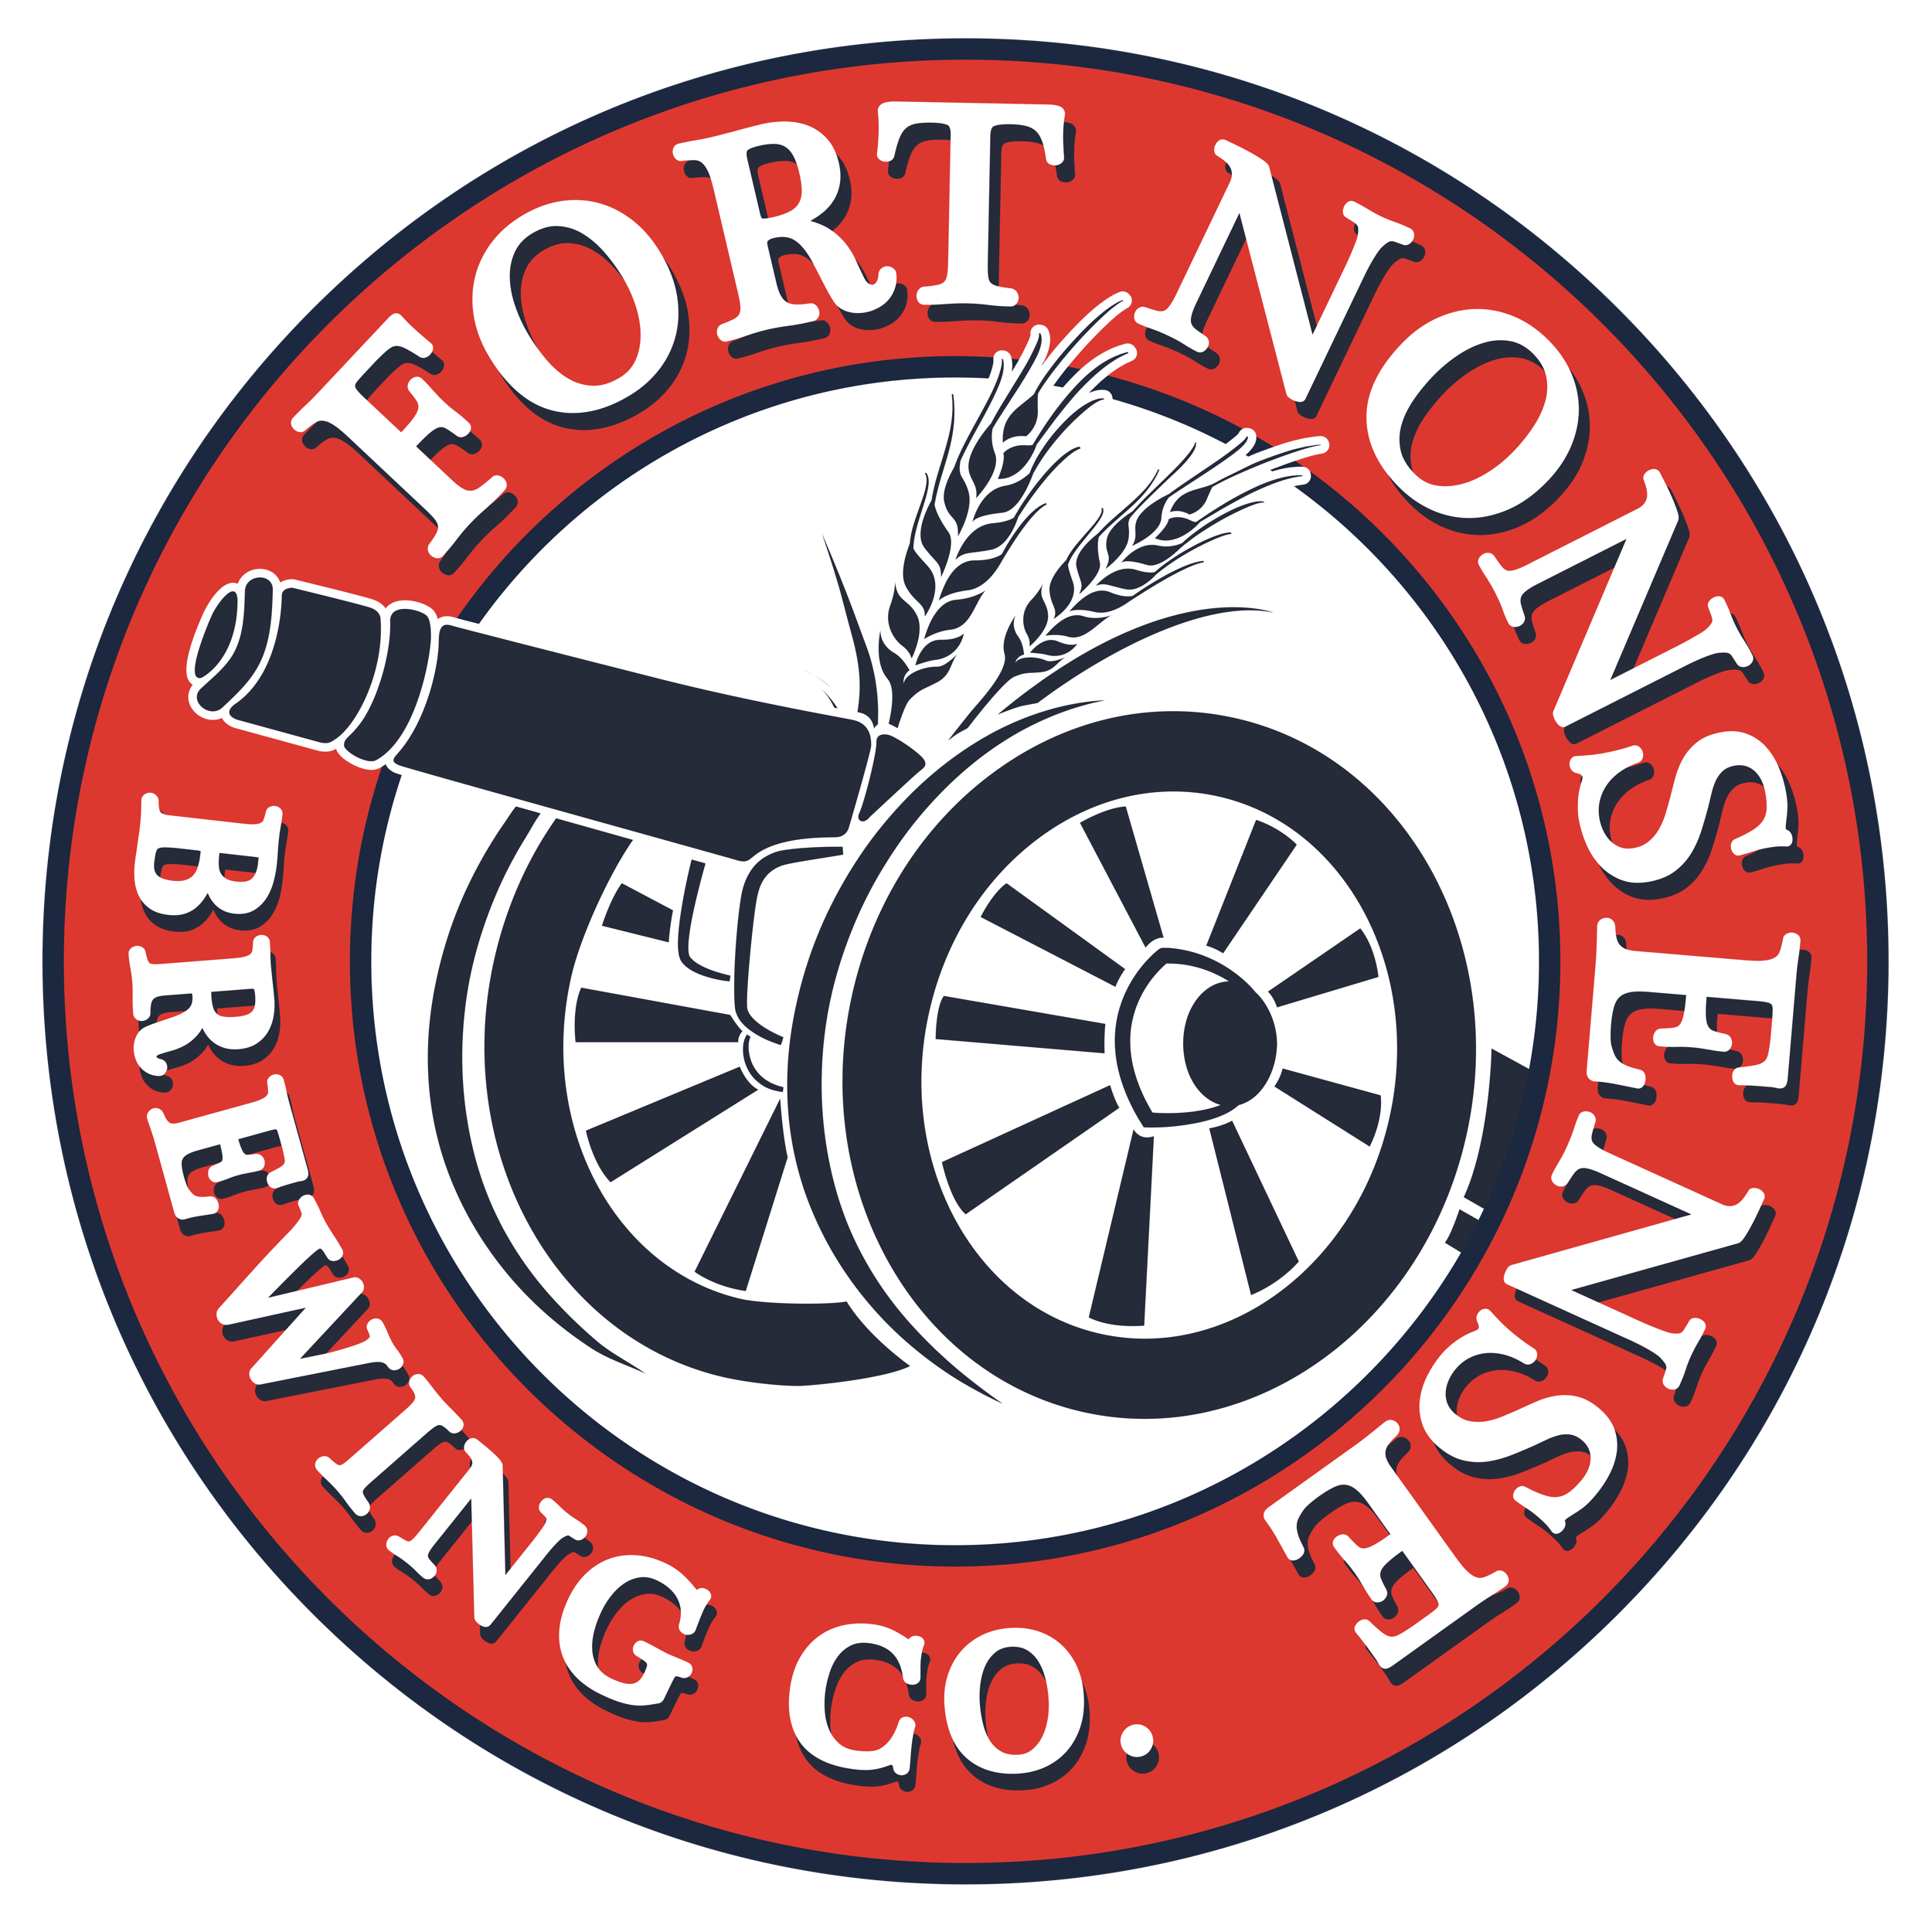 Fort Nonsense Brewing Company